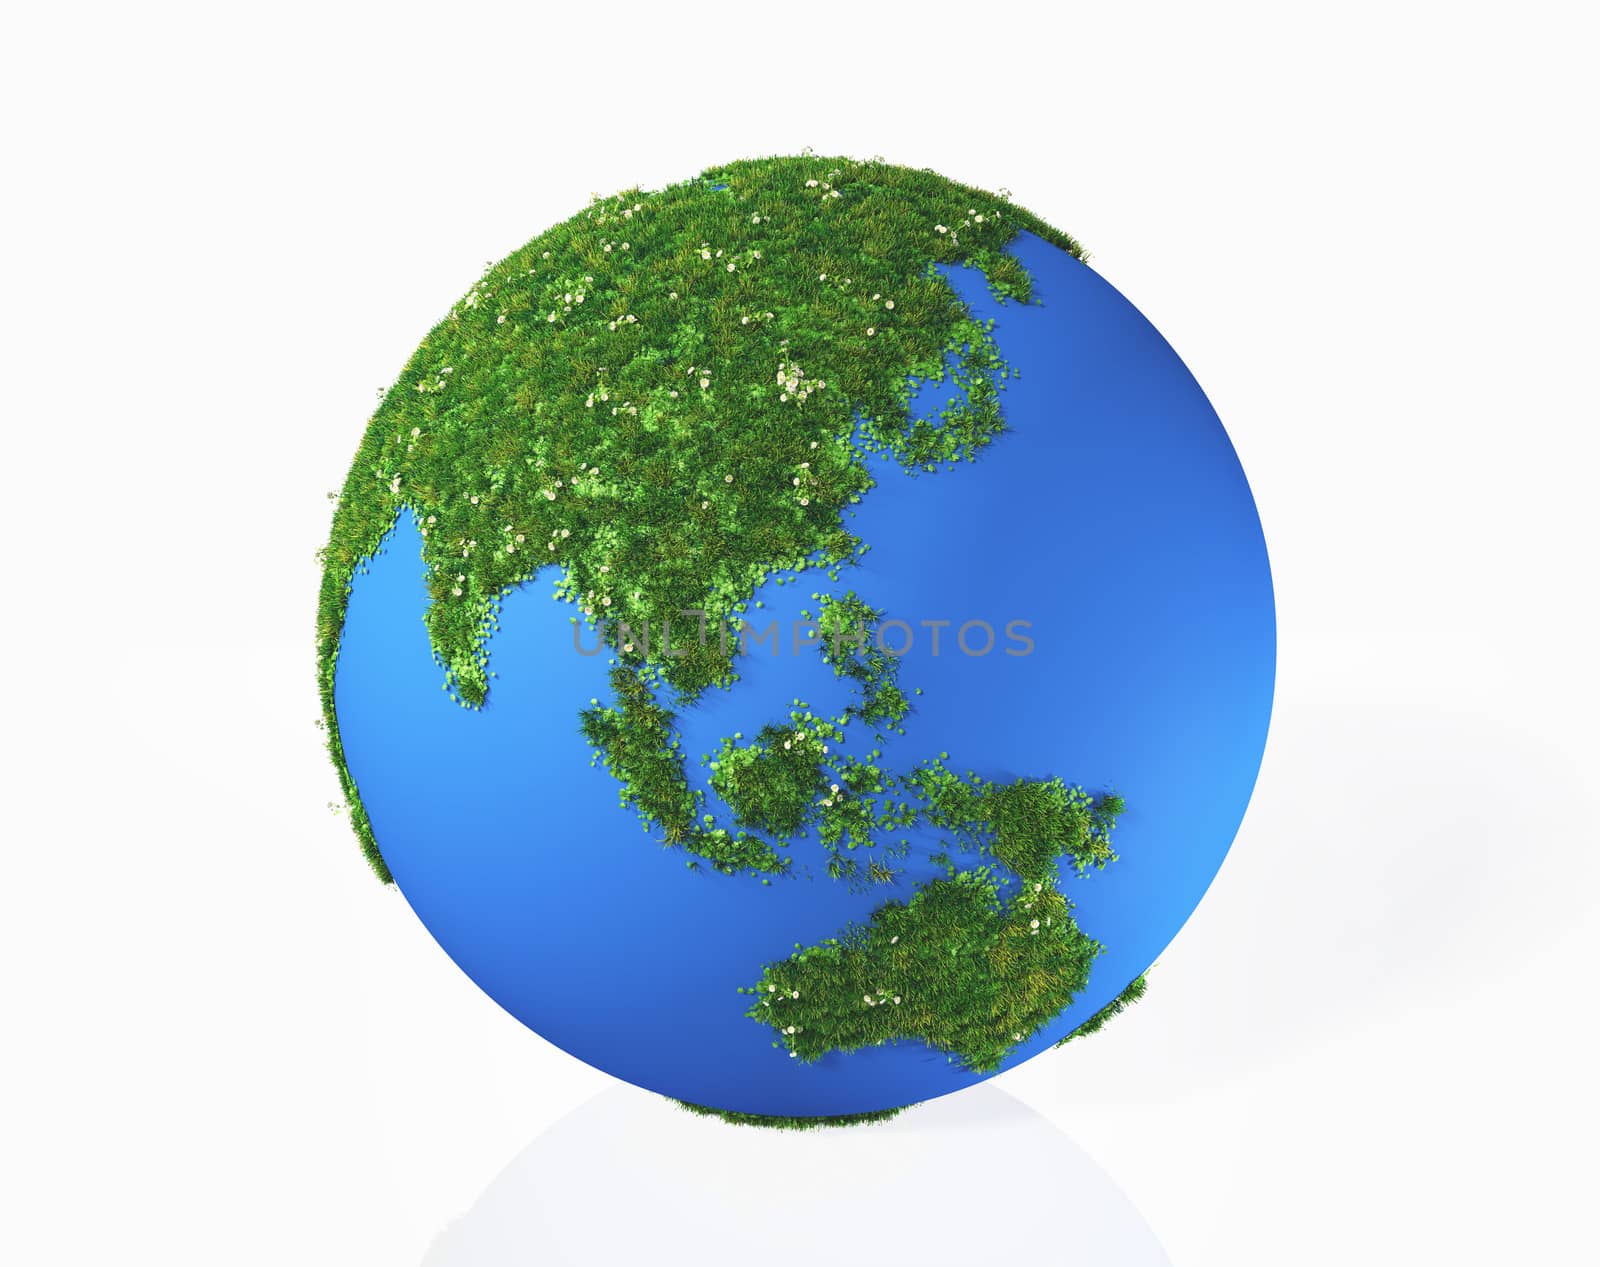 a 3d rendering of the world that has the continent asia made by grass and flowers, on a white background